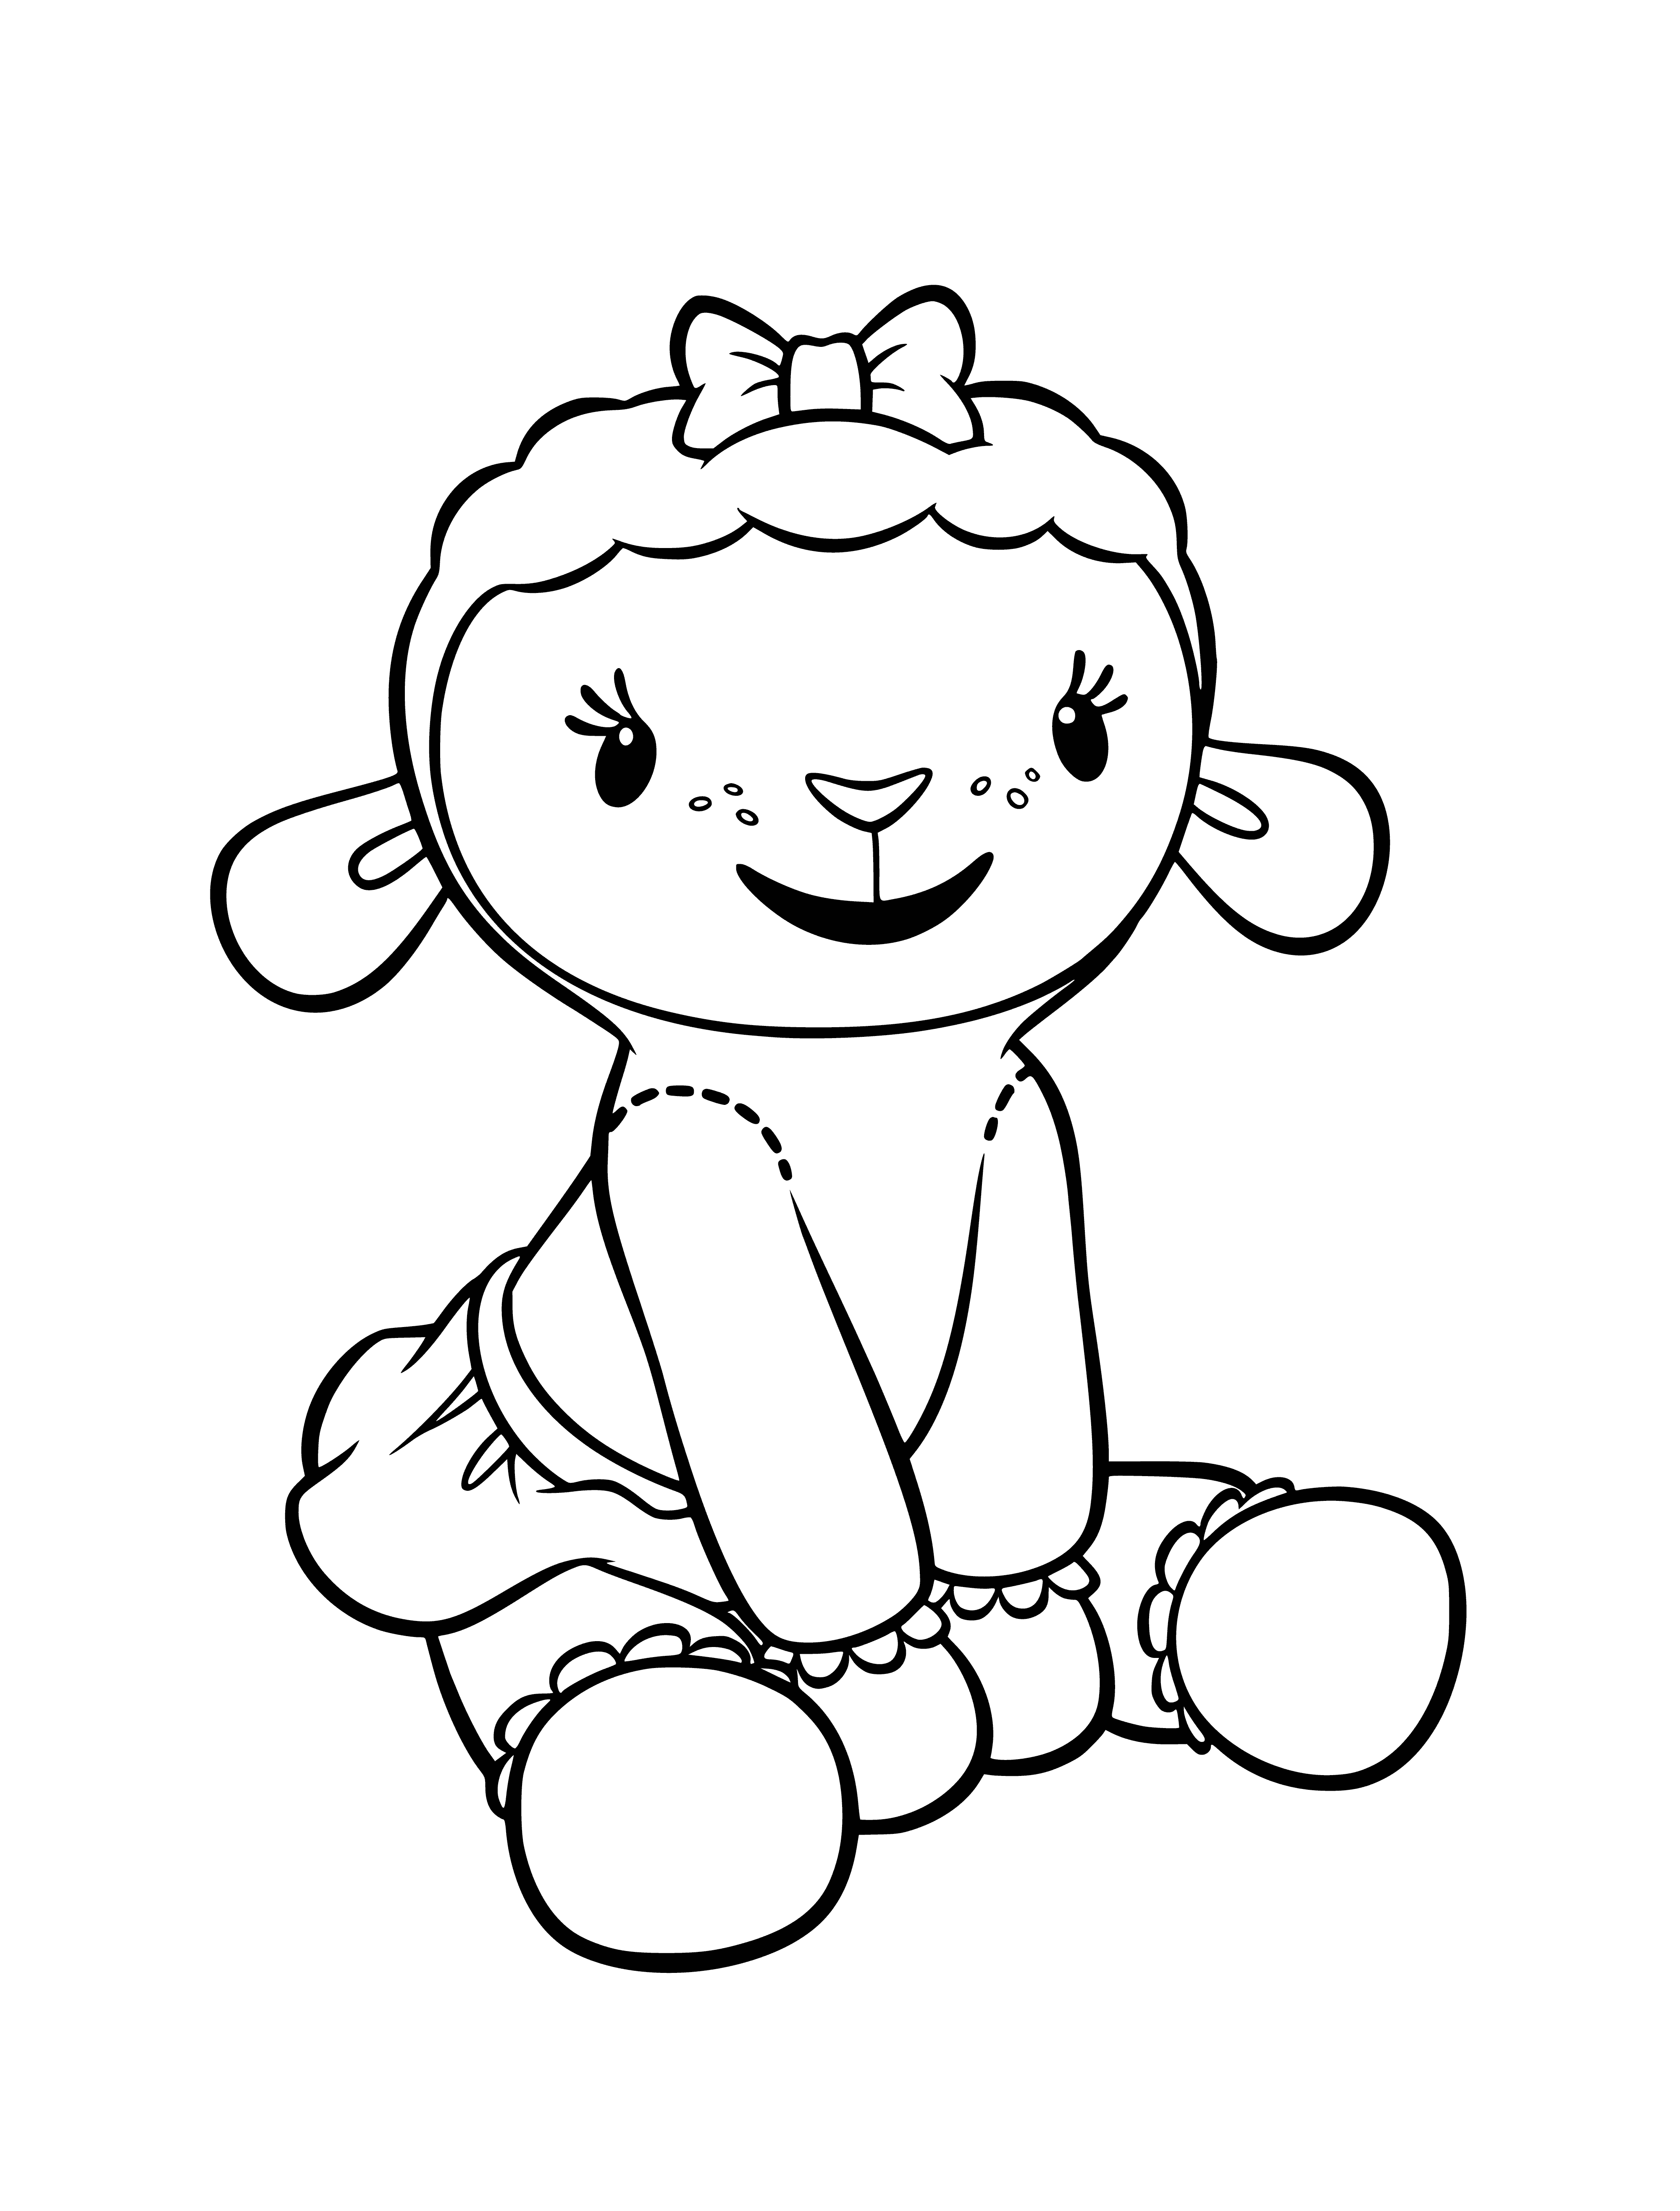 coloring page: Doc McStuffins examines Lammy the Sheep, looking at her head, body, and listening to her chest with a stethoscope. Lammy has a bandage on her head. #KidsCartoon